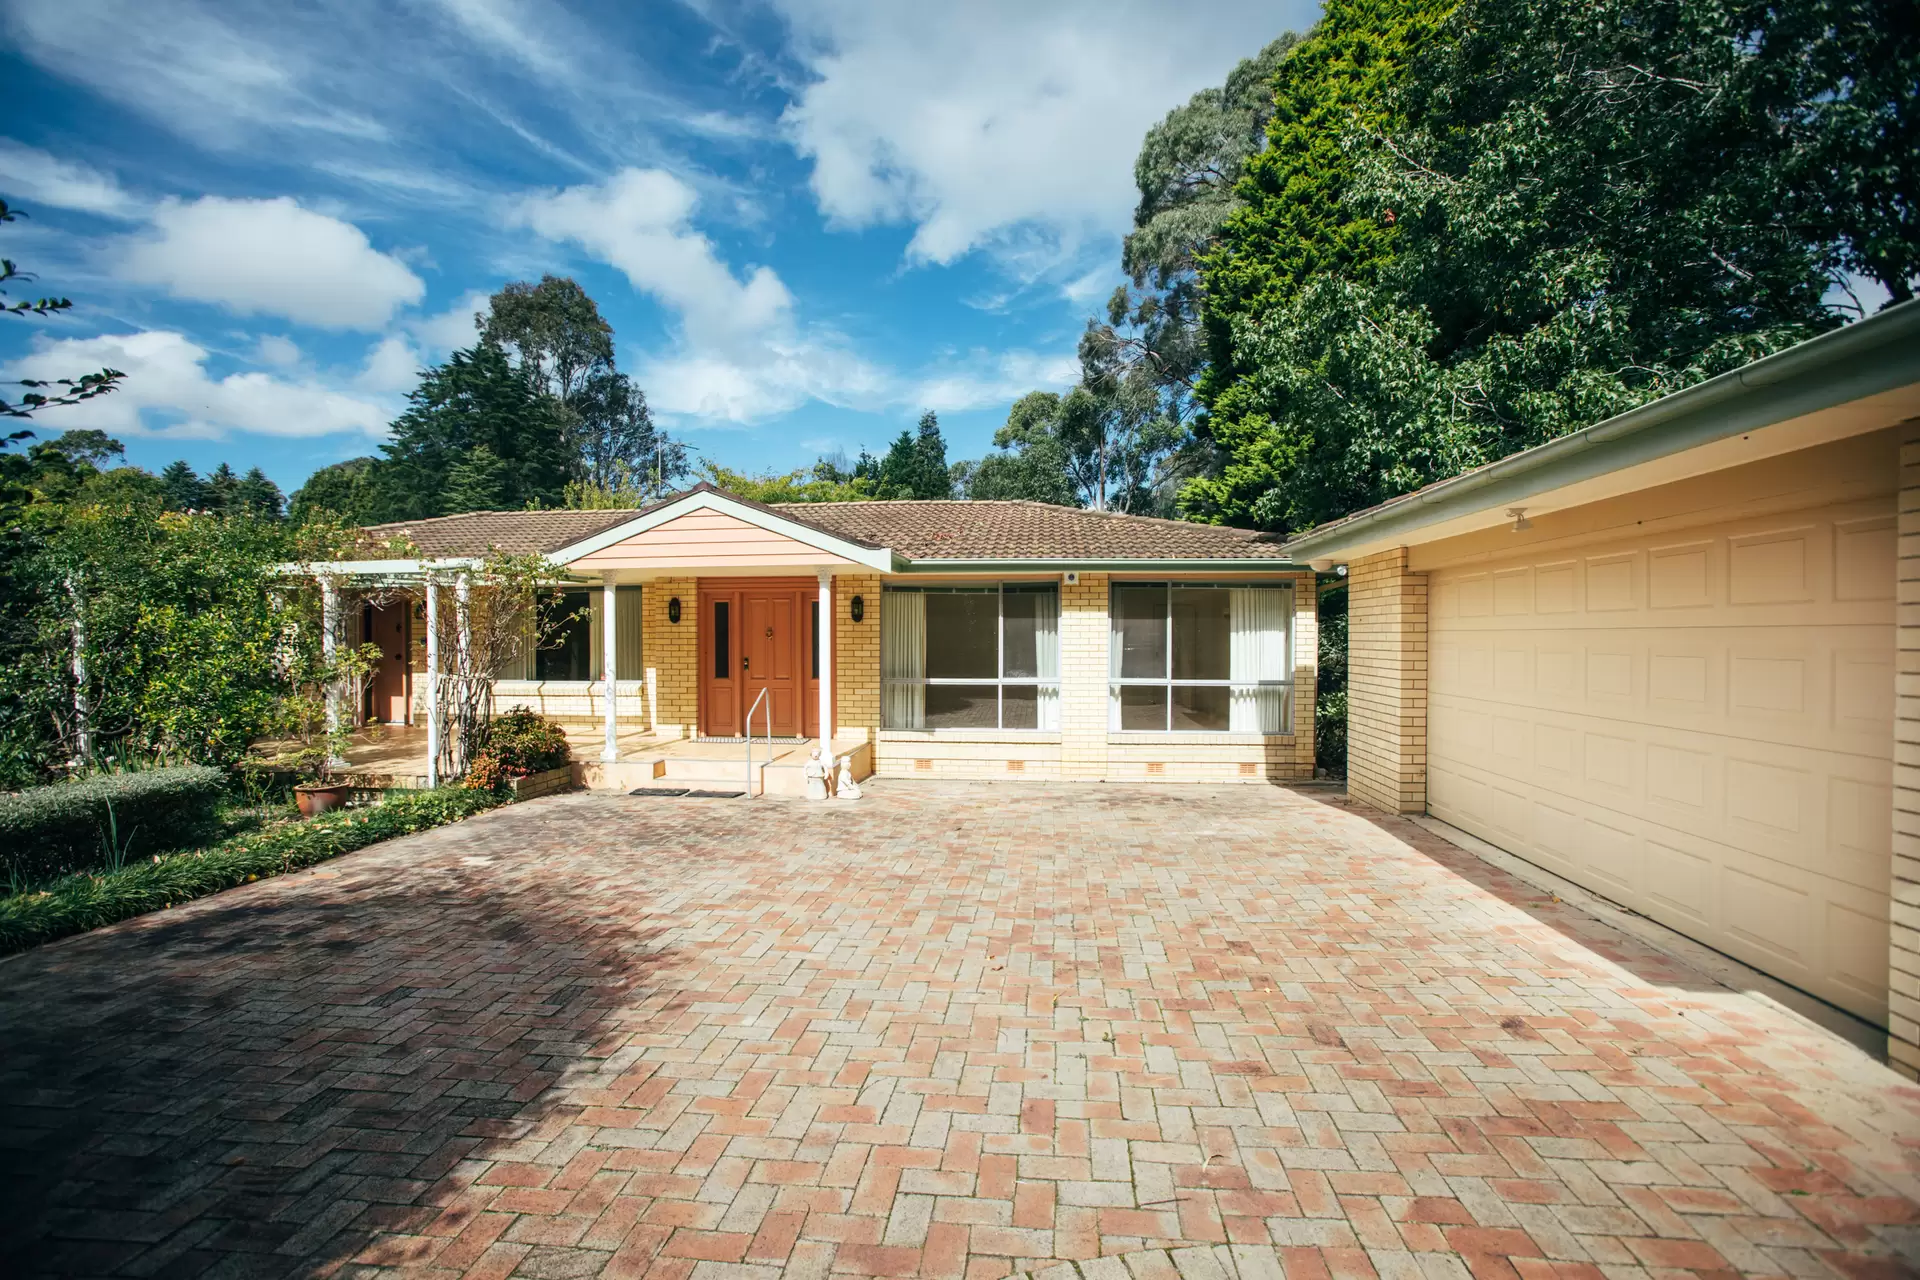 Photo #4: 57 Sunninghill Avenue, Burradoo - Sold by Drew Lindsay Sotheby's International Realty